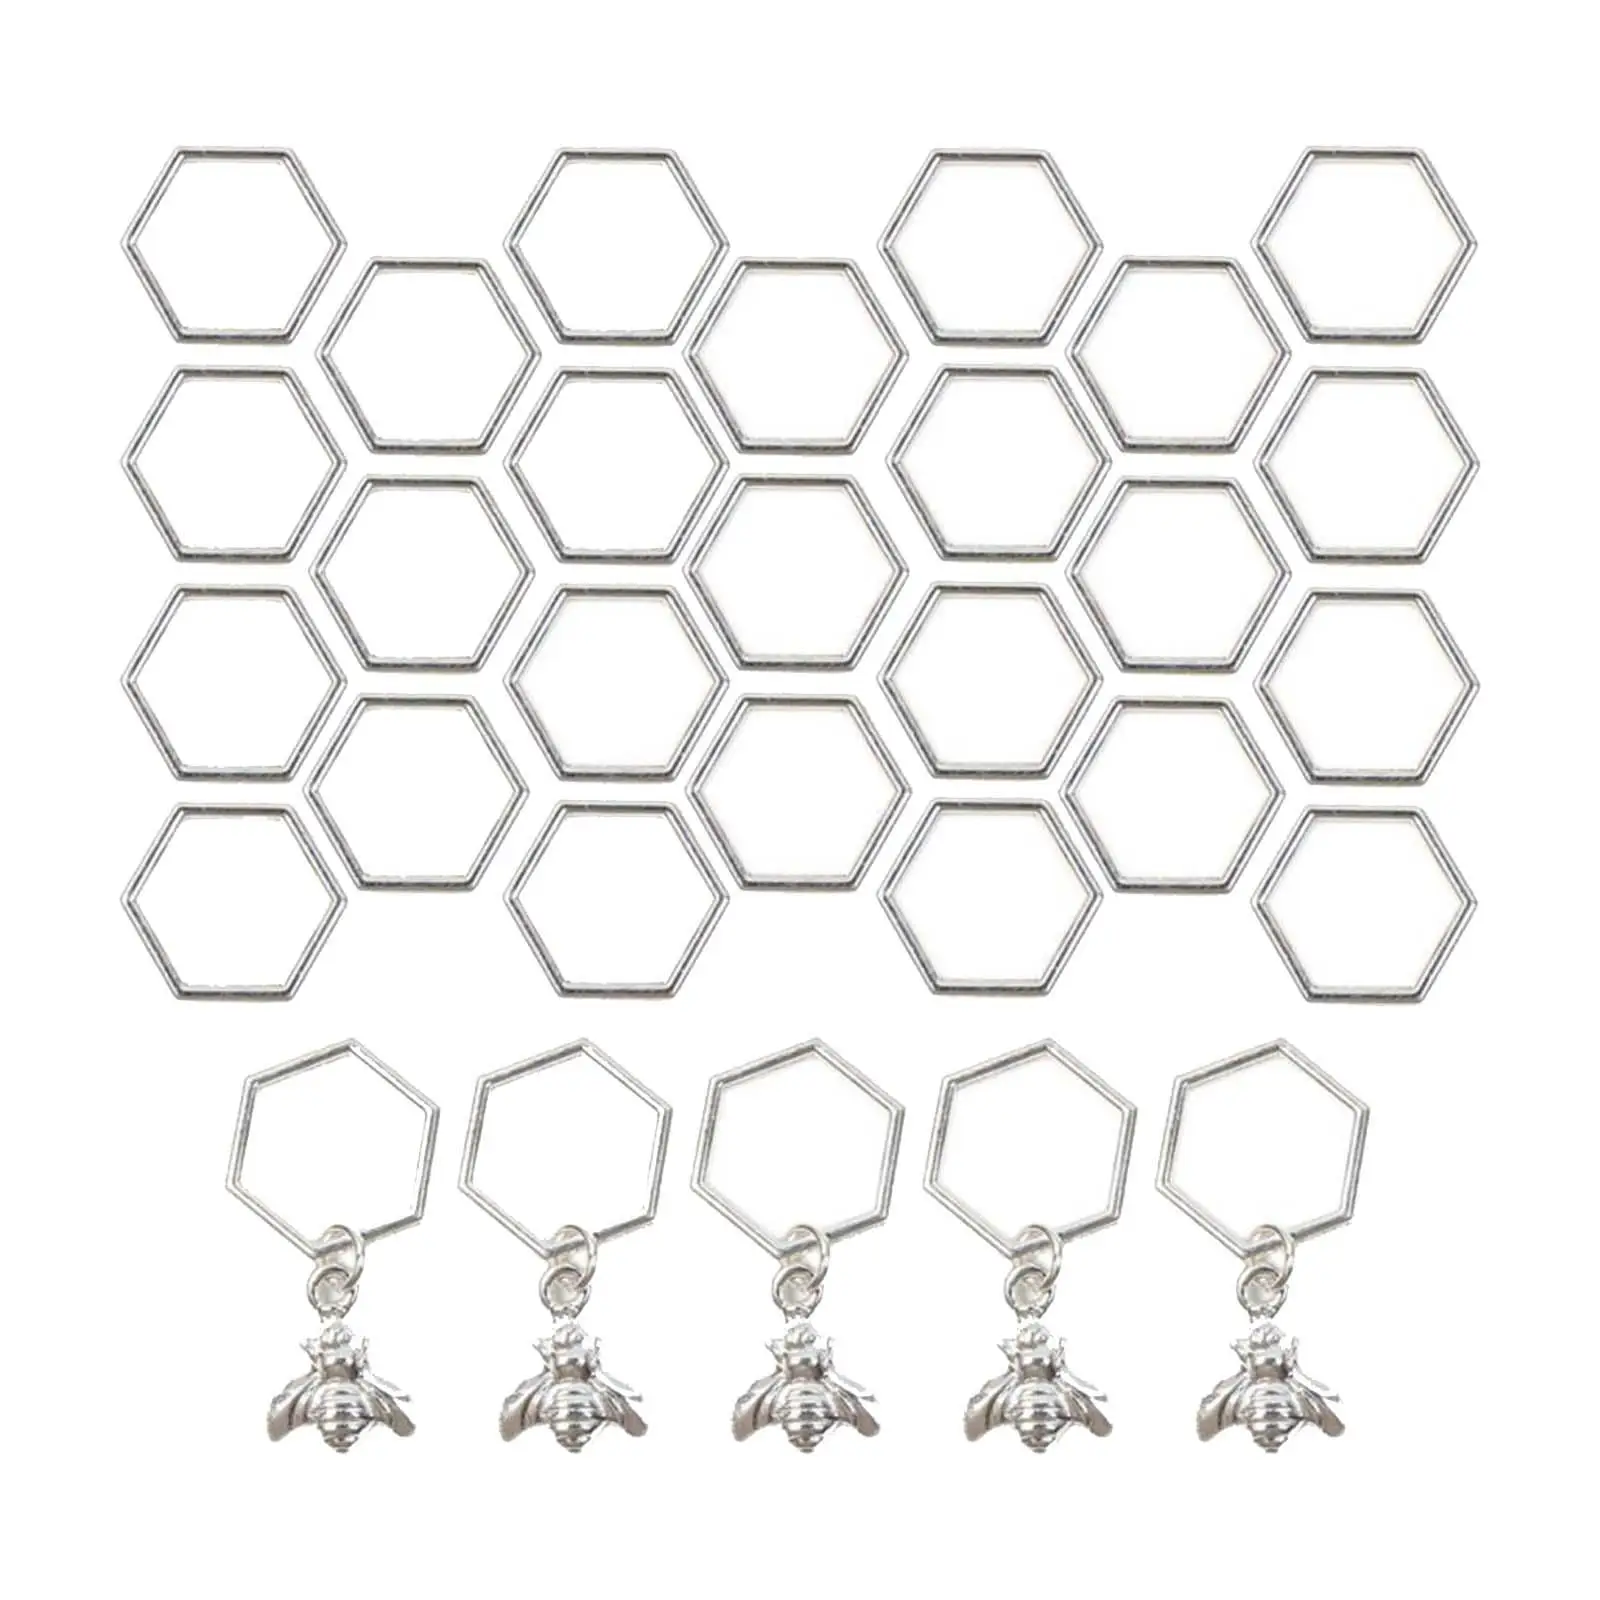 Stitch Markers Hexagon Smooth Zinc Alloy Stitch Needle Clip 30 Pack Protectors